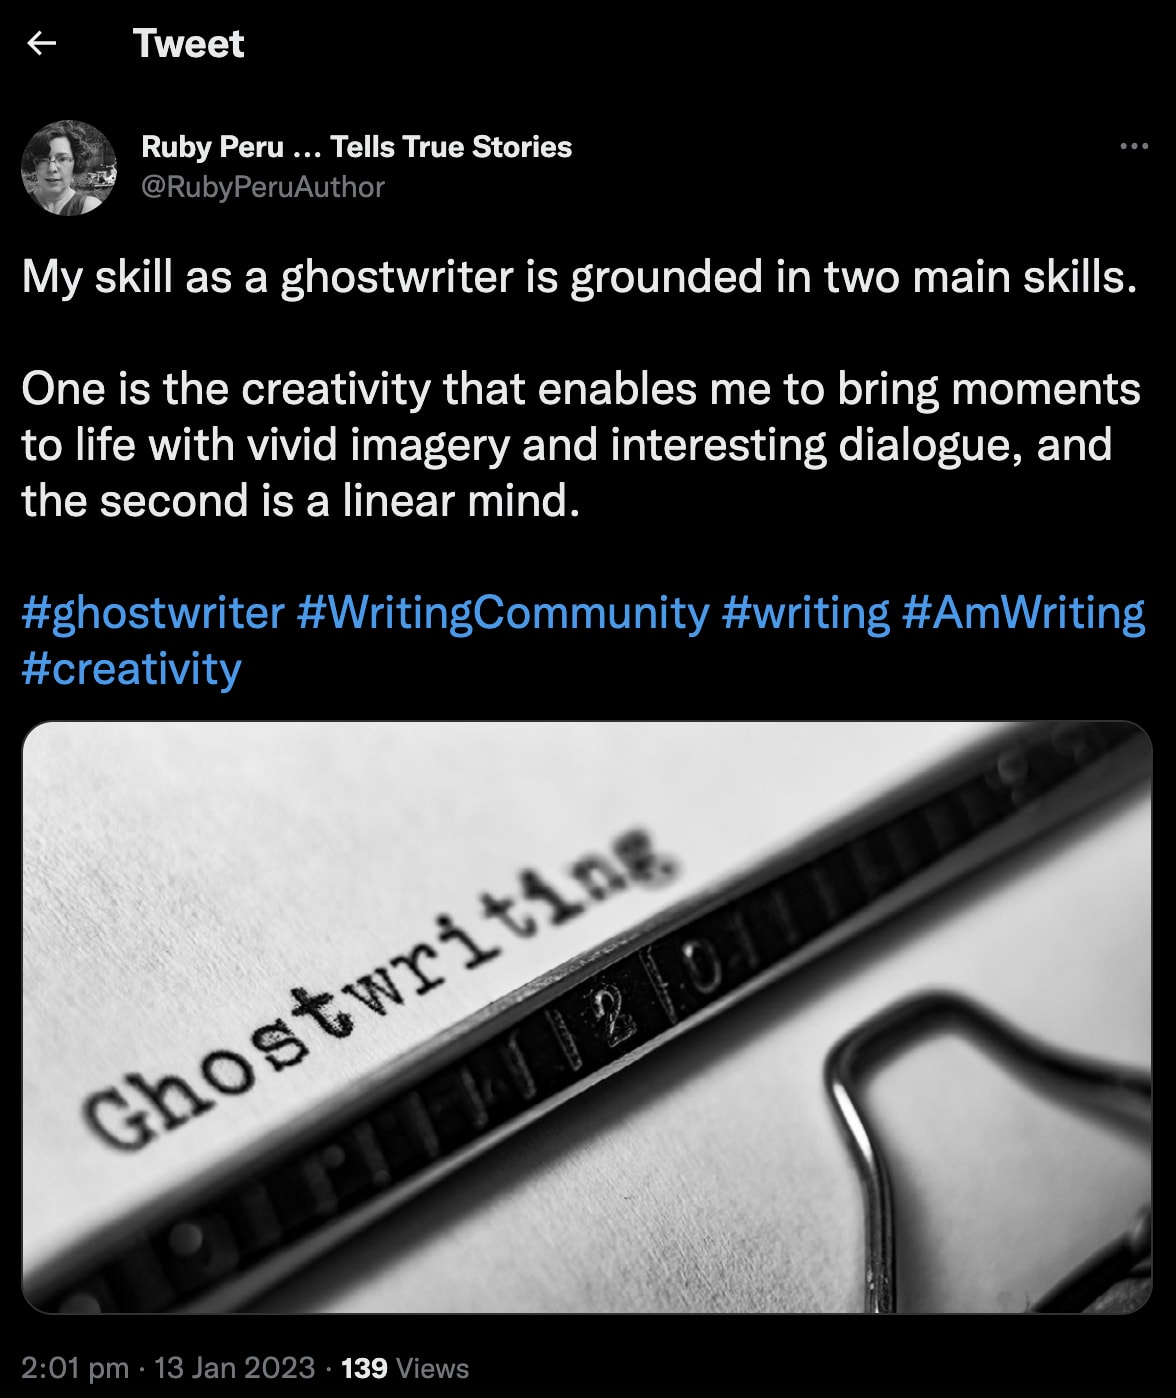 RubyPeruAuthor on Twitter about ghostwriting